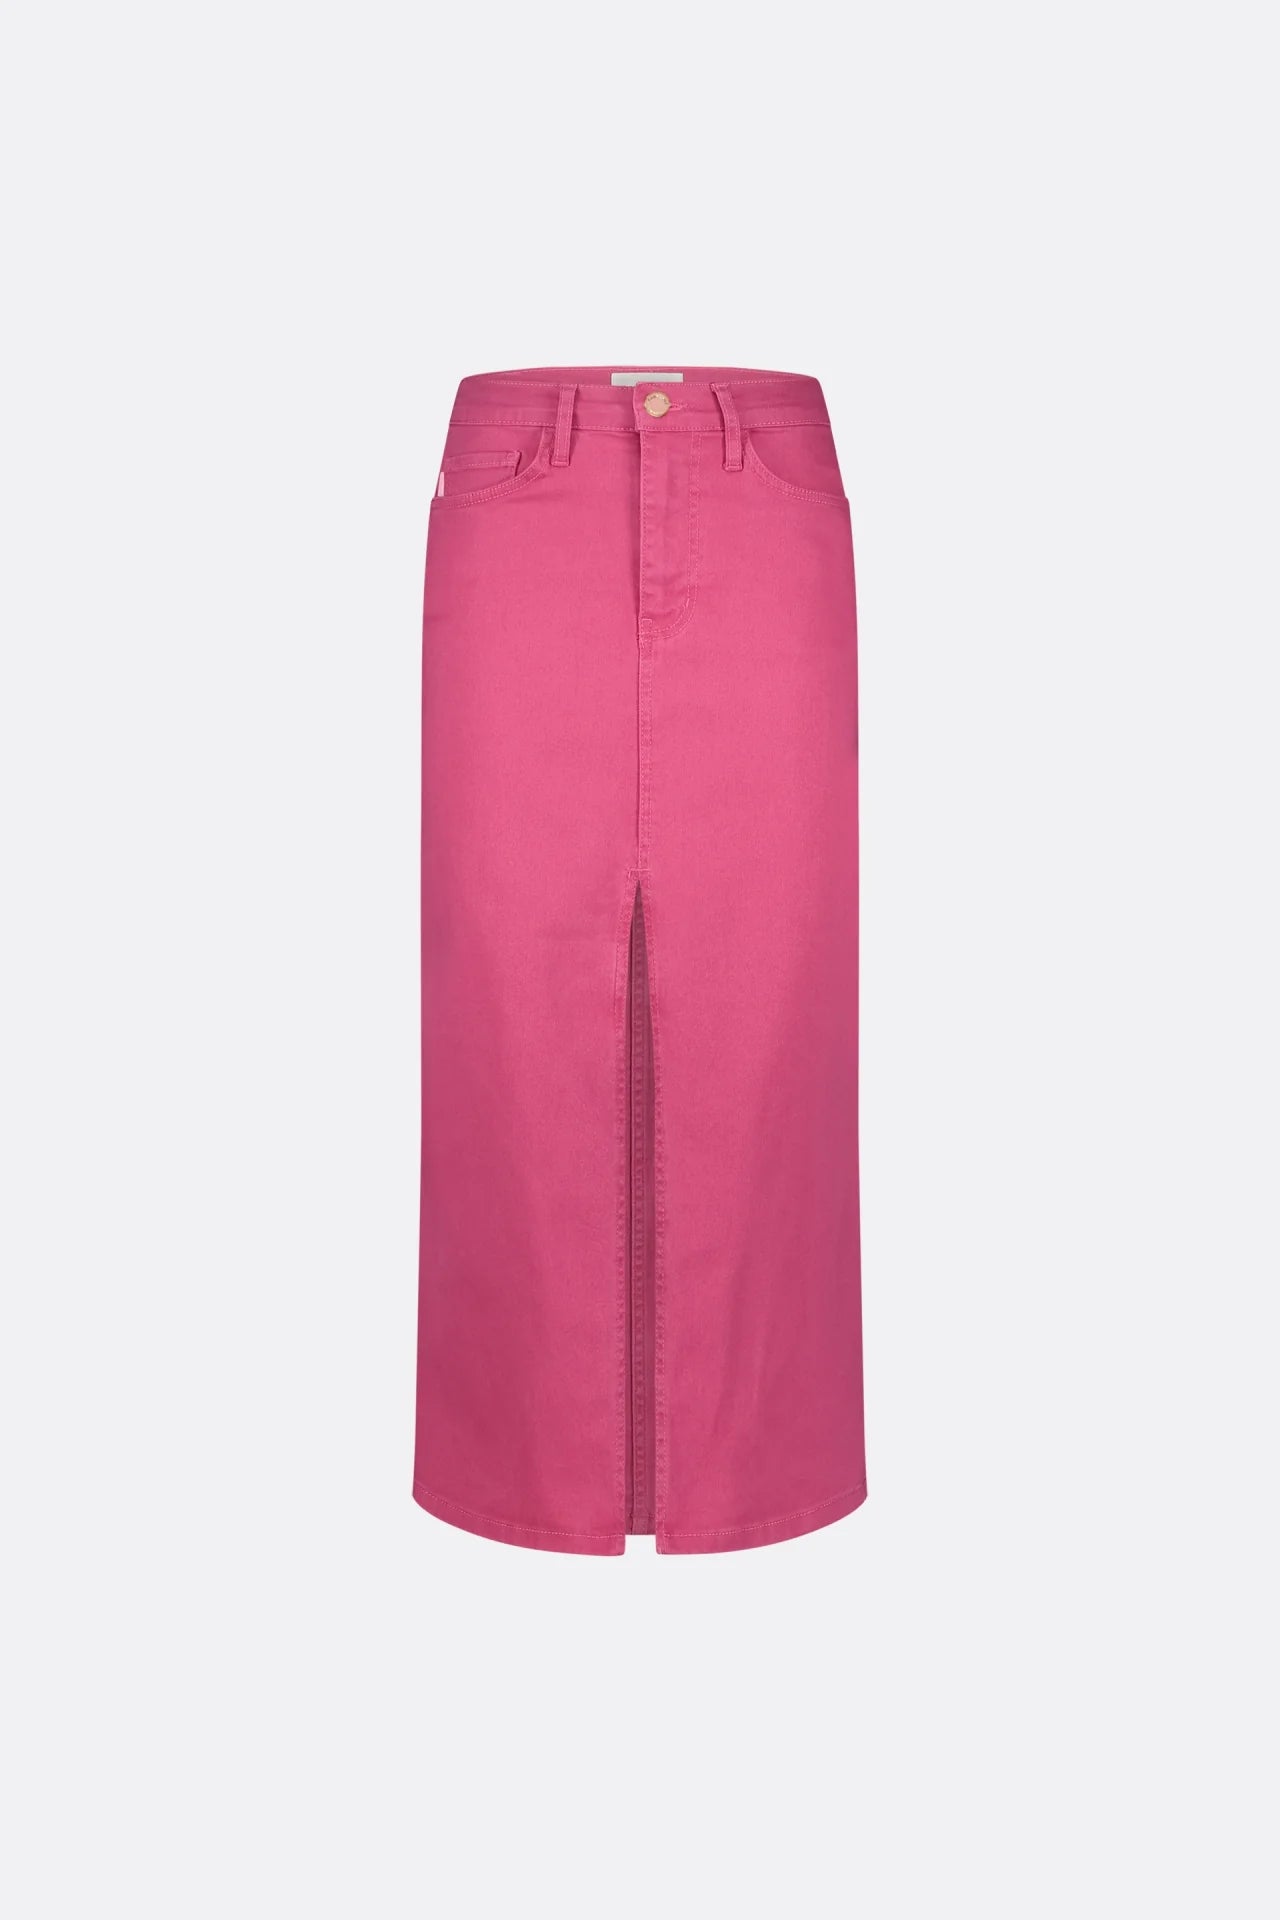 Fabienne Chapot Carlyne Skirt: Hot Pink midi denim skirt with button closure and front slit.